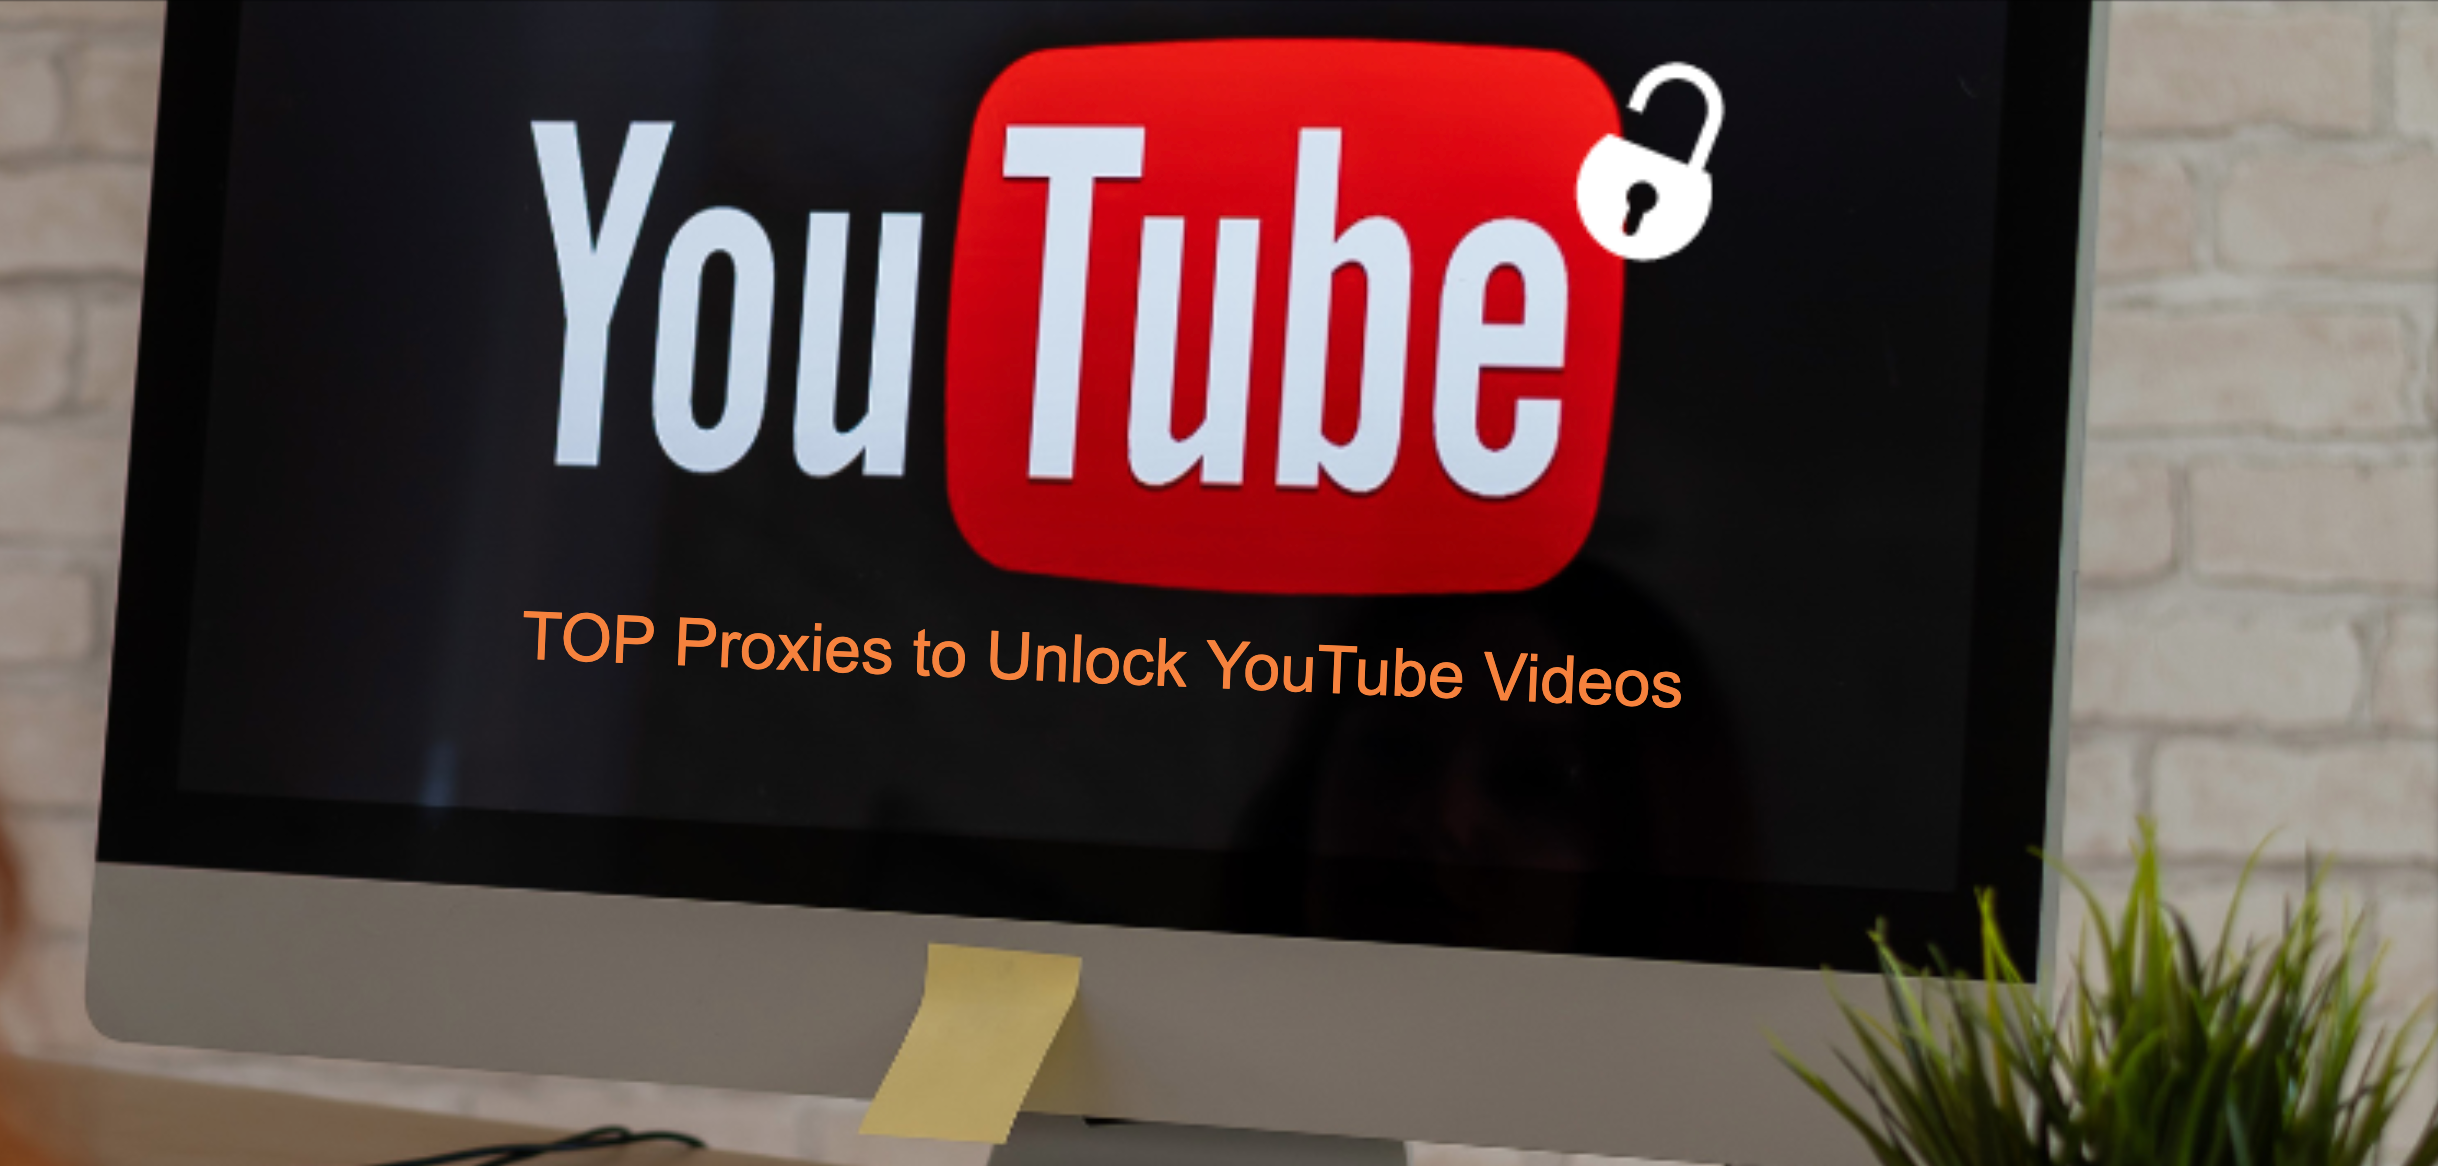 Best Cheap YouTube Proxies